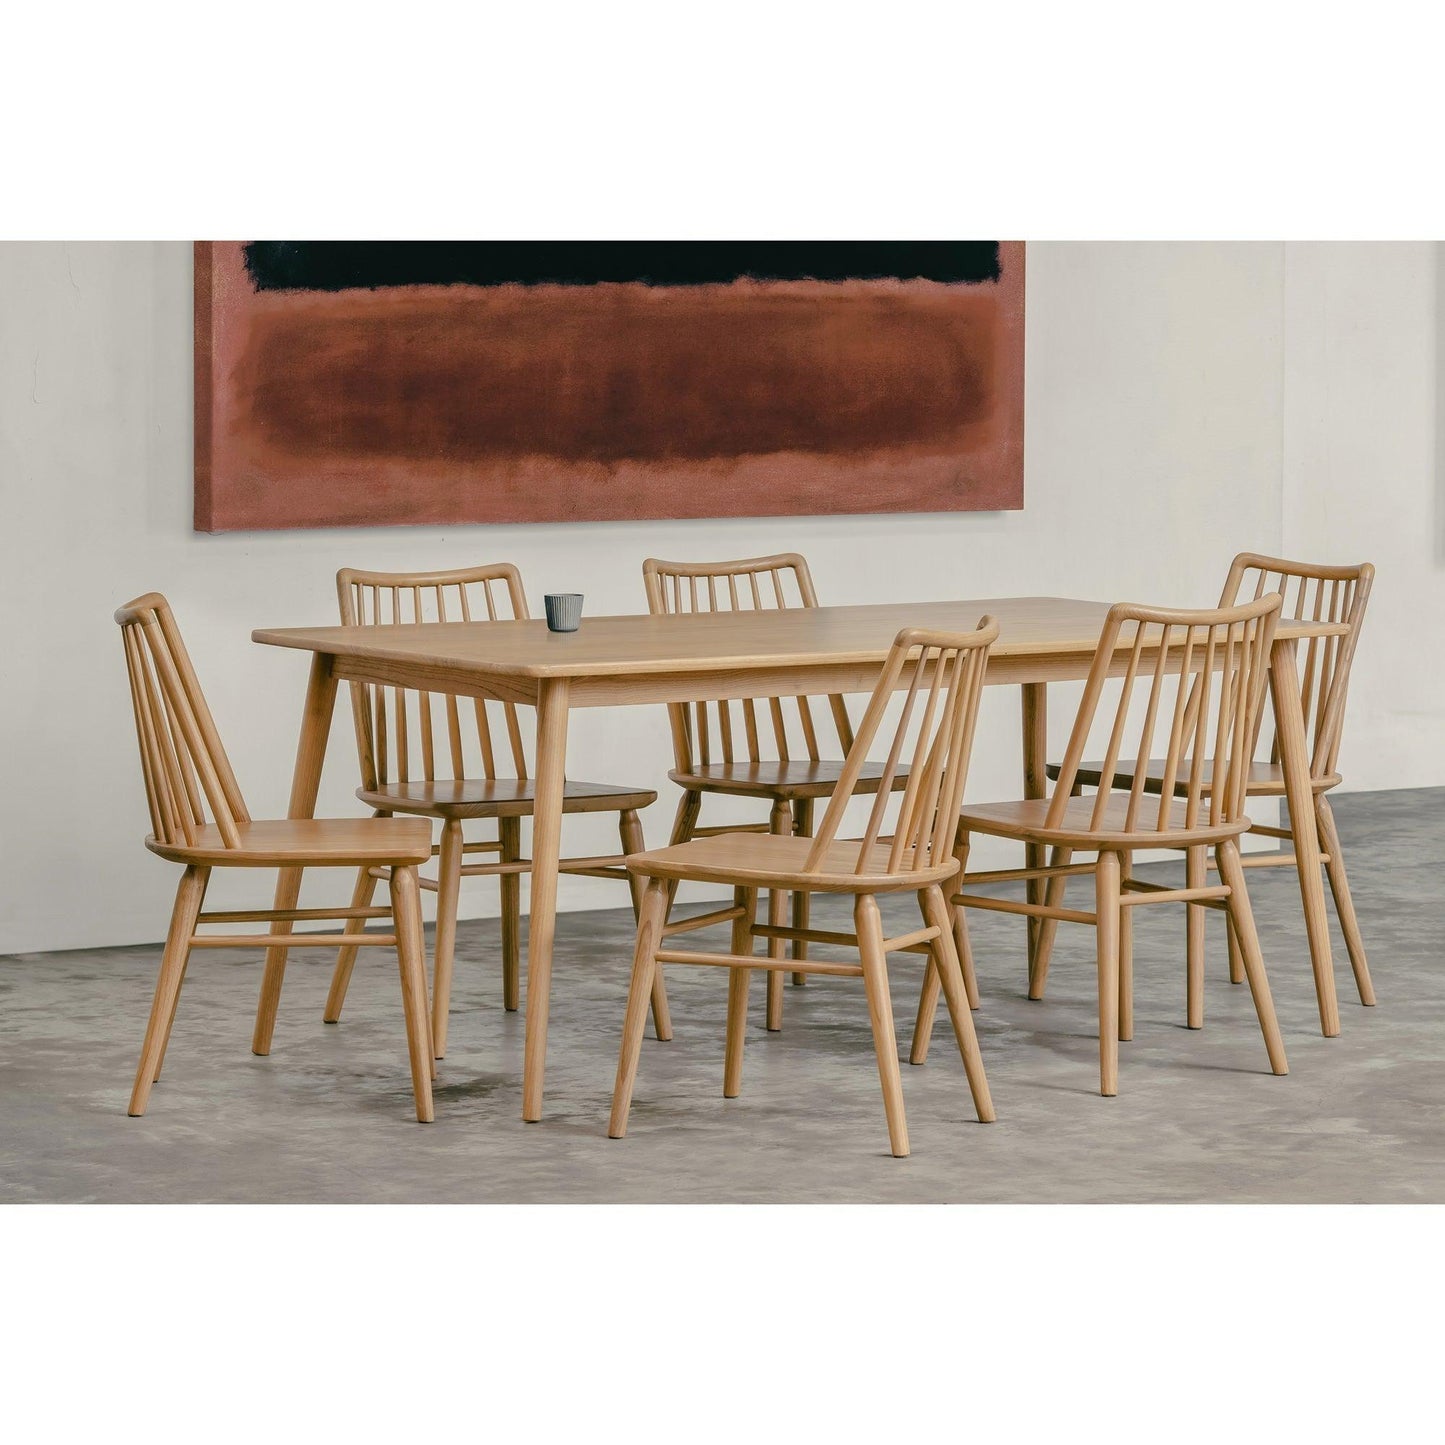 Riviera Solid Oak Dining Chair - Set fo 2 (Natural) - Dining ChairCH 050 RVR Set of 2 (N)754169483524 5